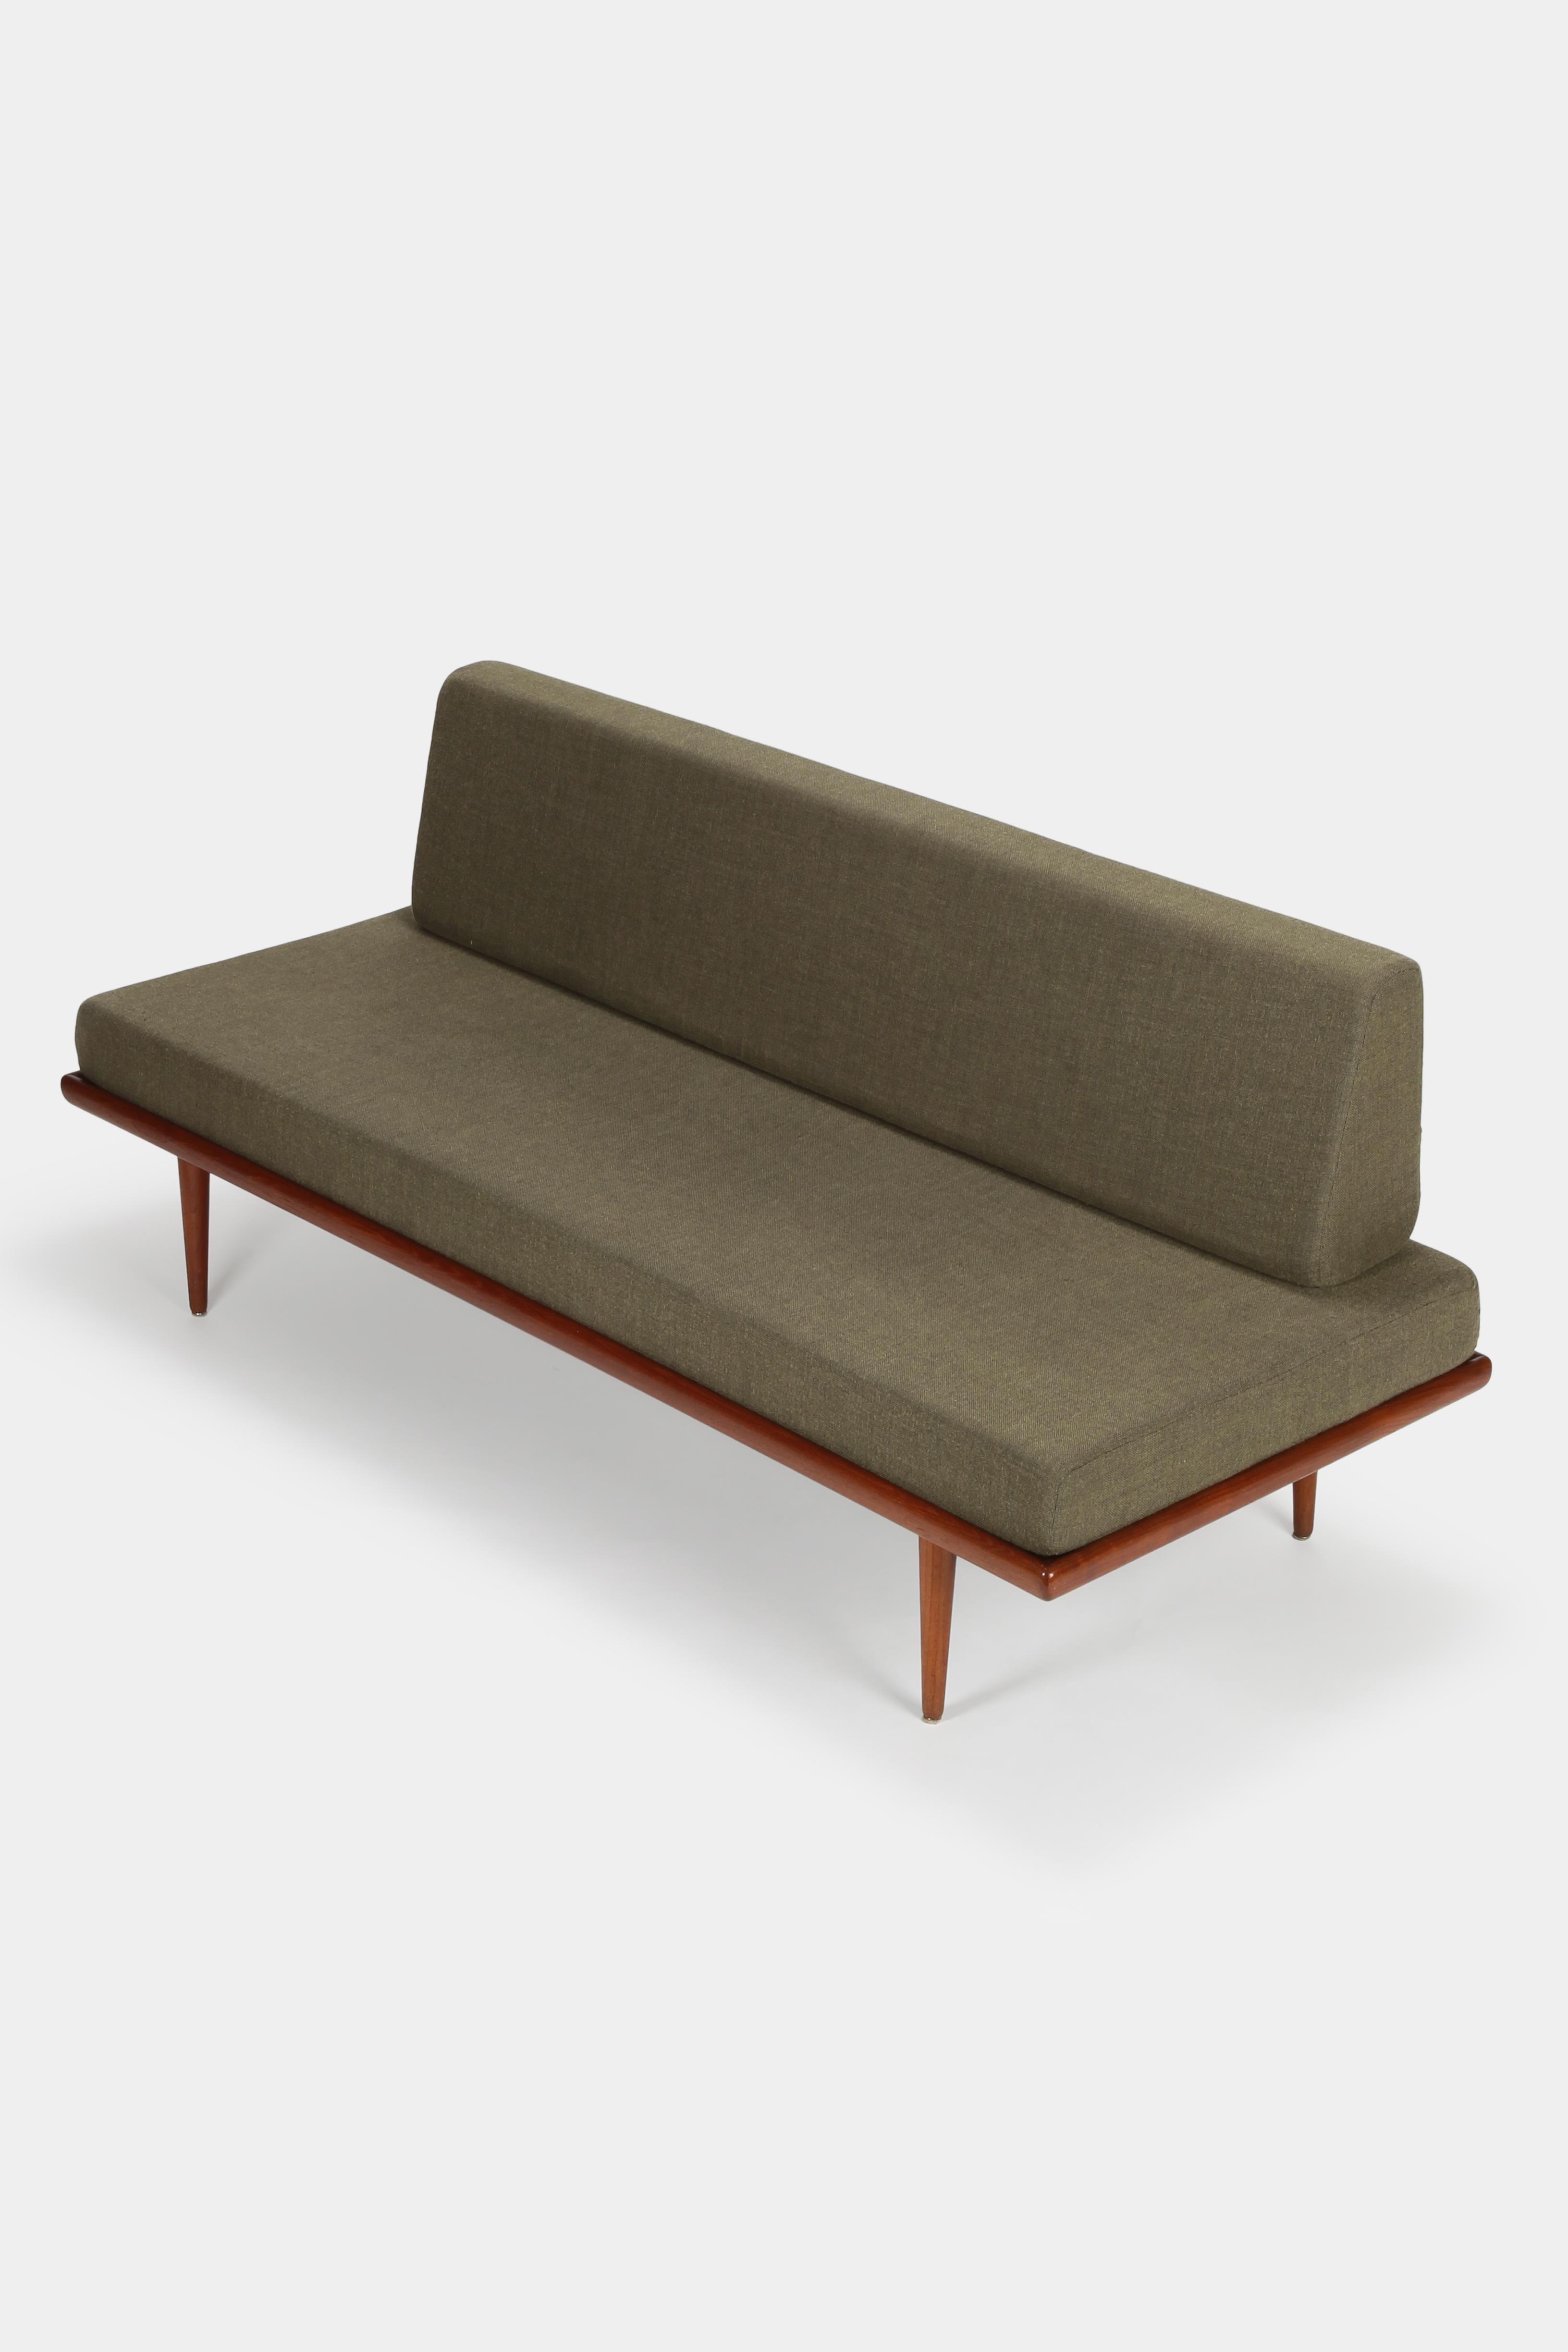 Stunning Minerva sofa or daybed, designed by Peter Hvidt and Orla Molgaard Nielsen for France & Son in 1955. Great craftsmanship, made of solid teak and chrome-plated metal. The backrest can be removed, making it suitable as a guest bed or daybed.